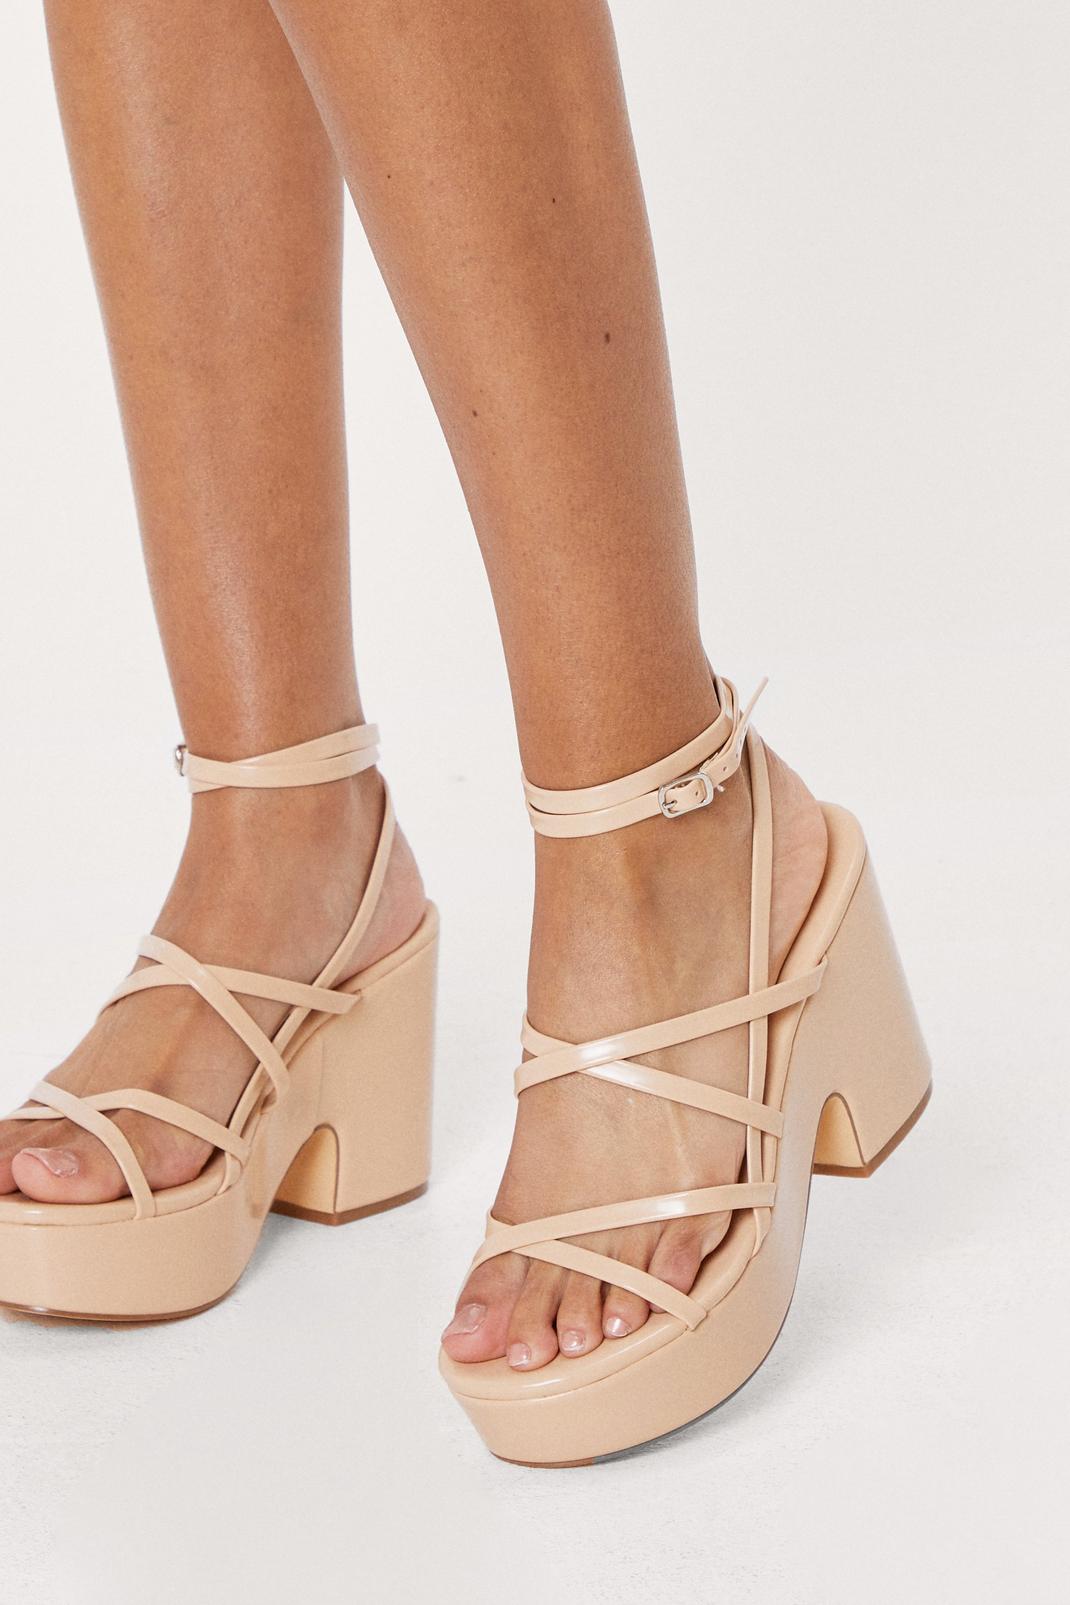 Nude Patent Faux Leather Strappy Platform Heels image number 1